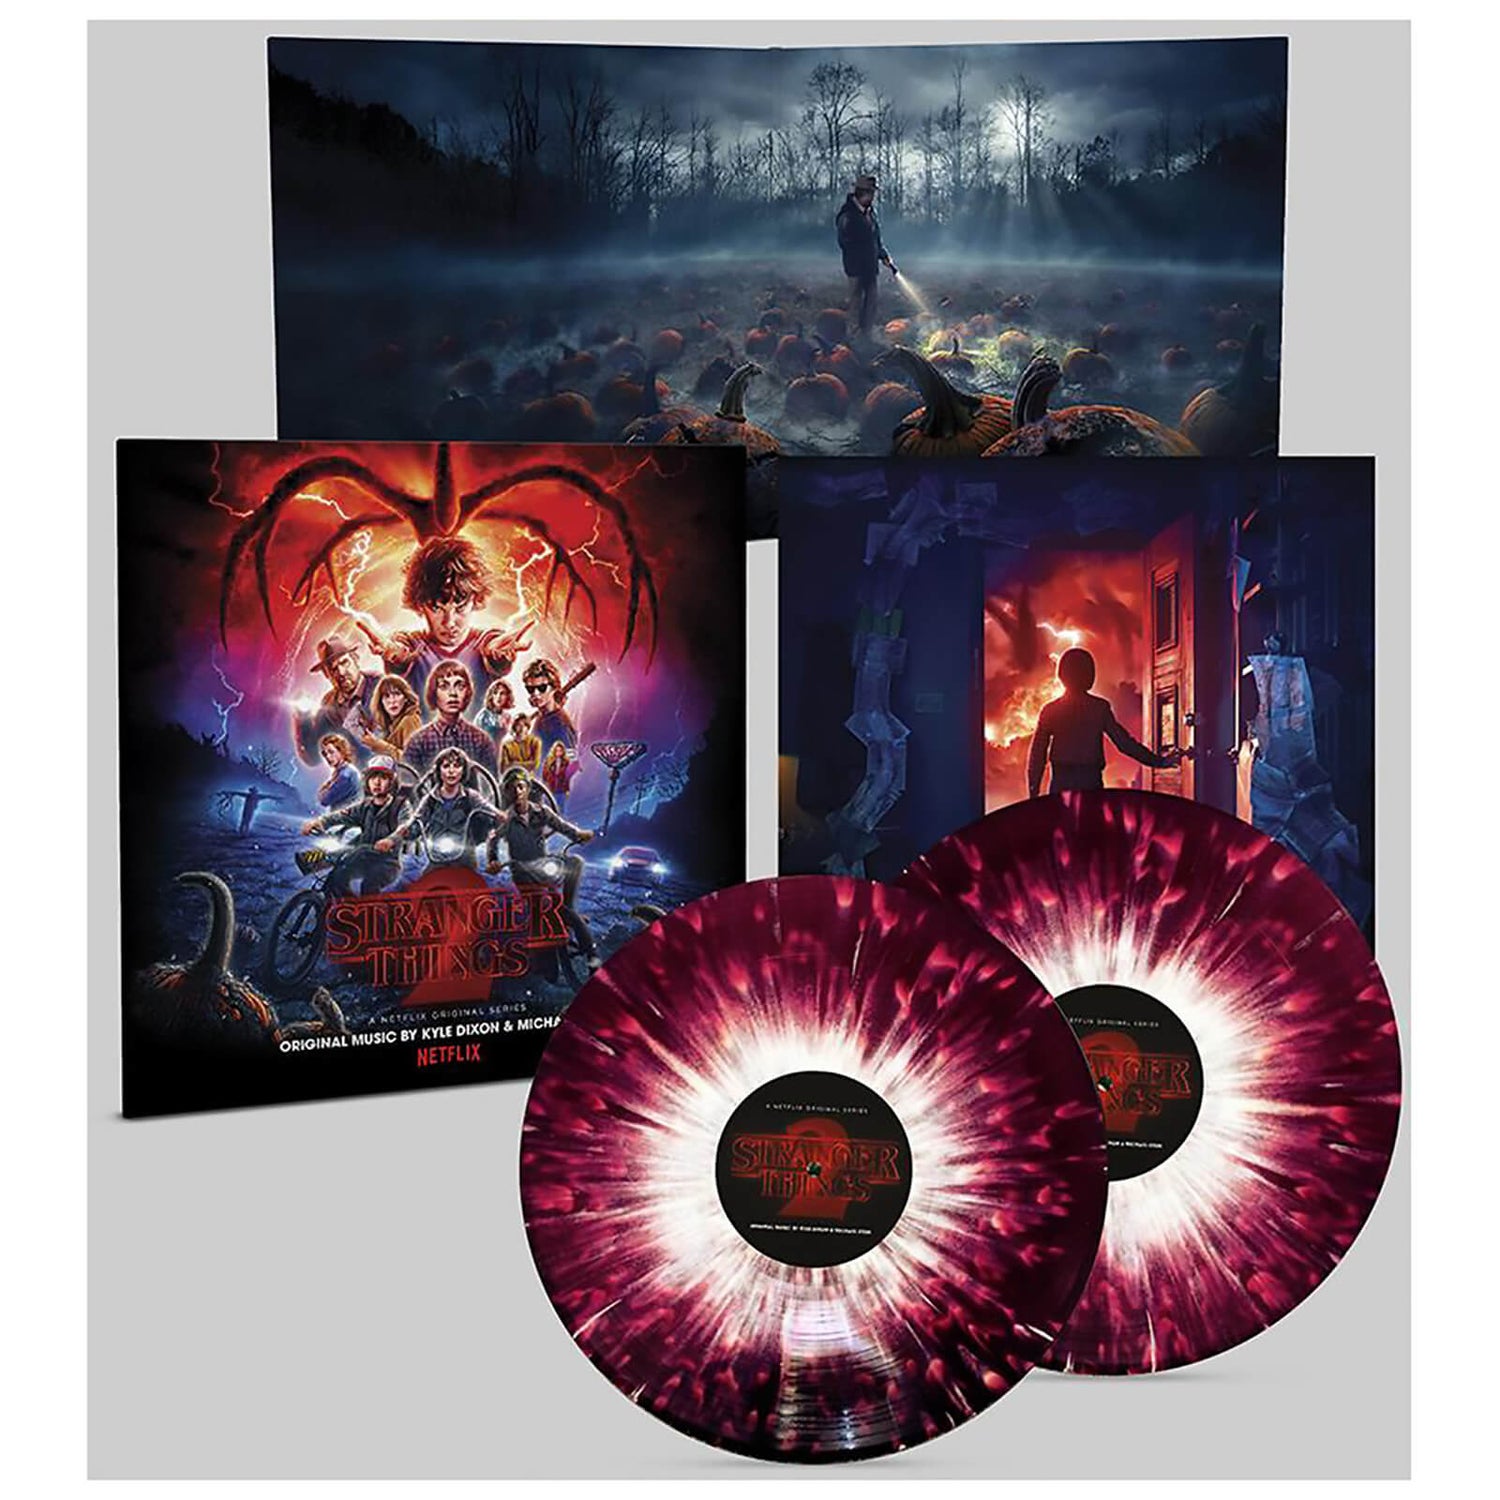 Stranger Things 2 (A Netflix Original Series Soundtrack) 180g 2xLP (Clear Crystal with Blue & White Splatter)